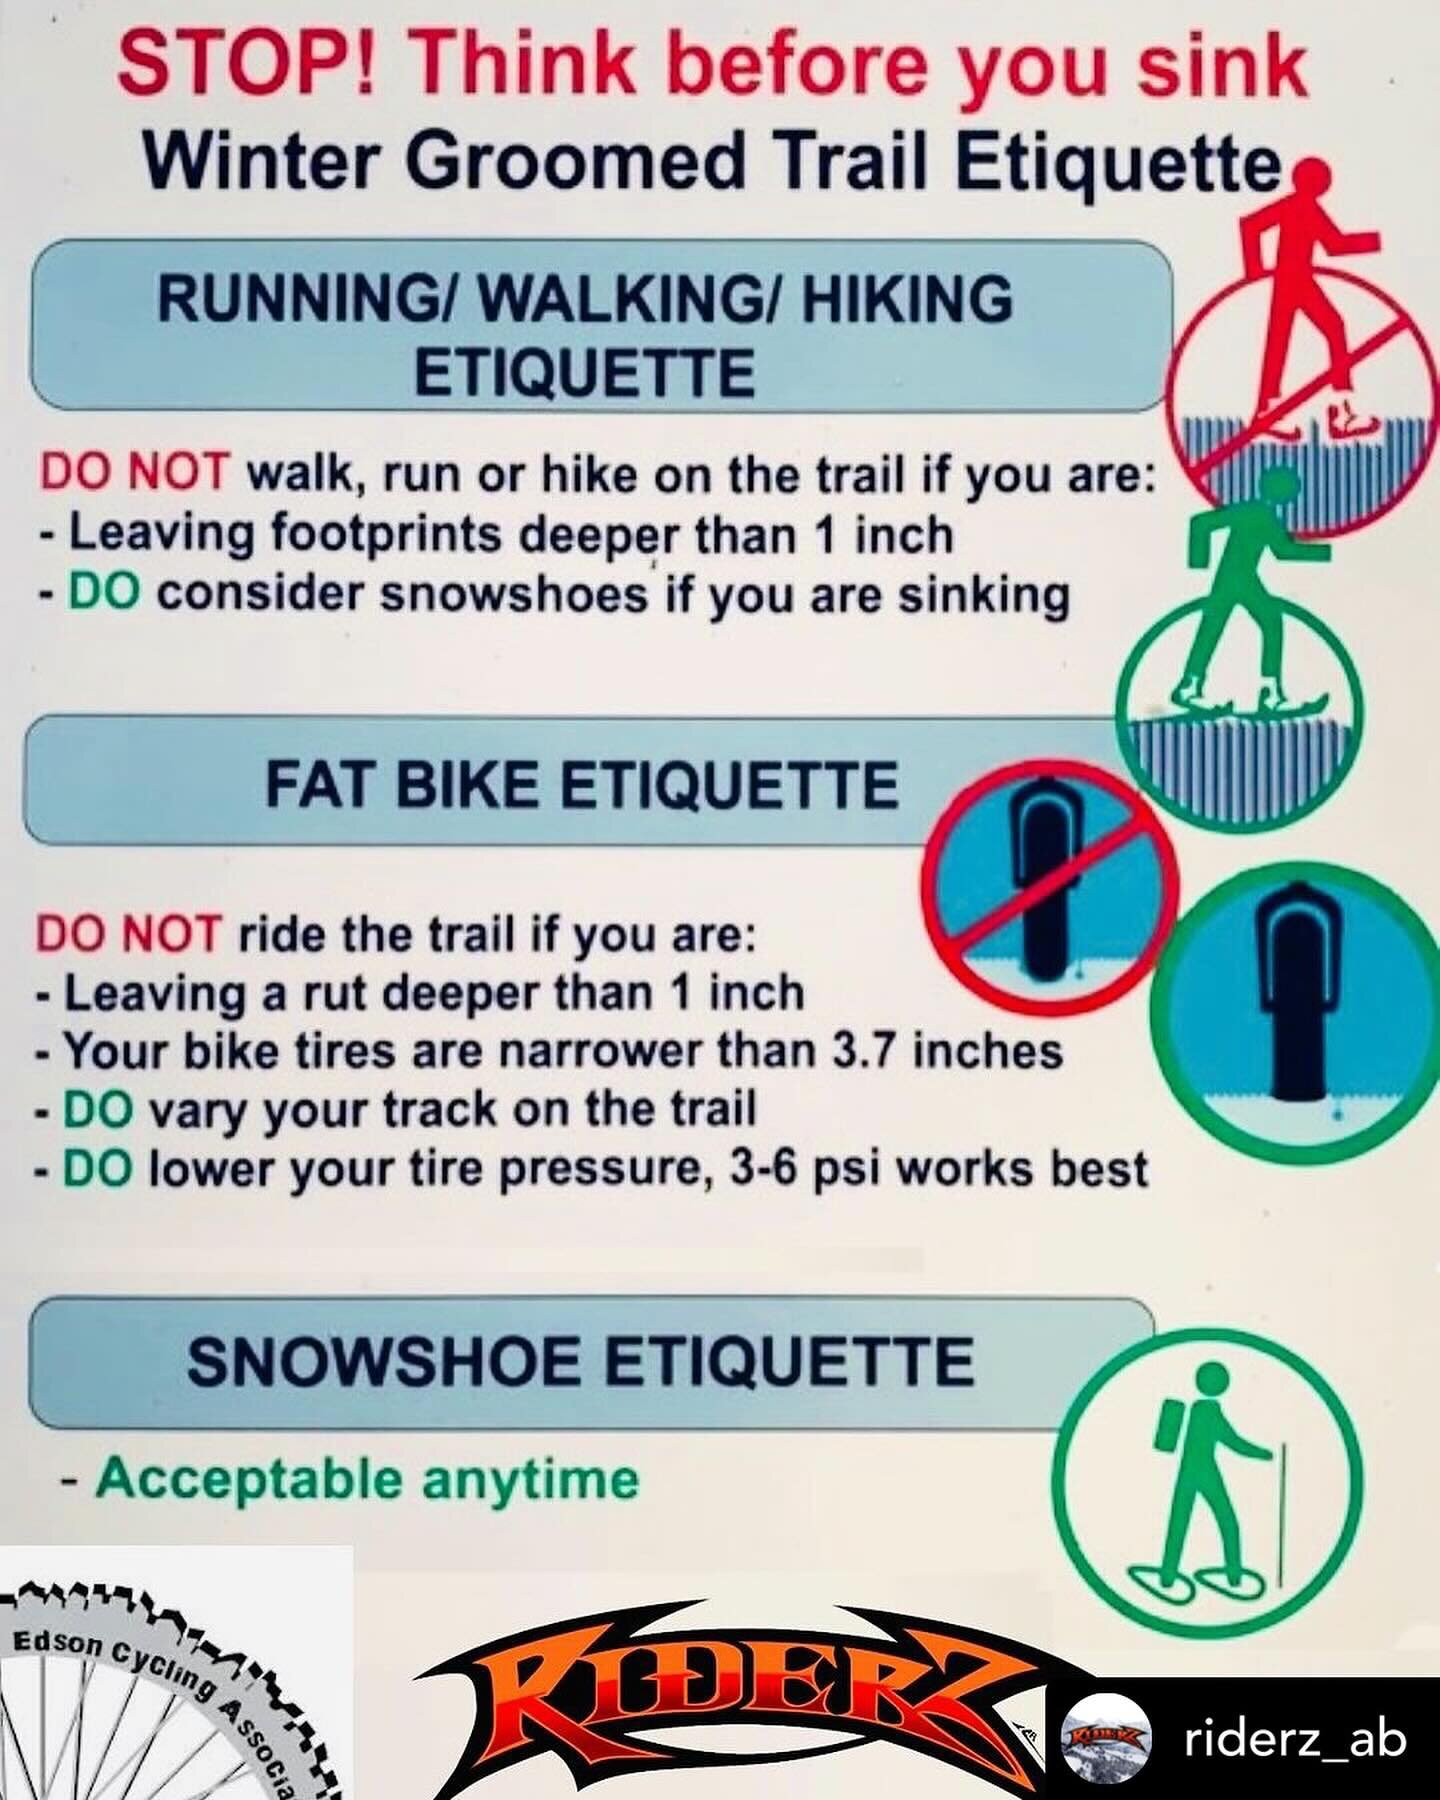 Trails are groomed and ready at Wilmore Park!! Get your fattys out and enjoy the beautiful weather coming up! Tag us in all your winter bike posts - we love to see it. 

Please see friendly reminder about trial etiquette. 

A huge thank you to @rider